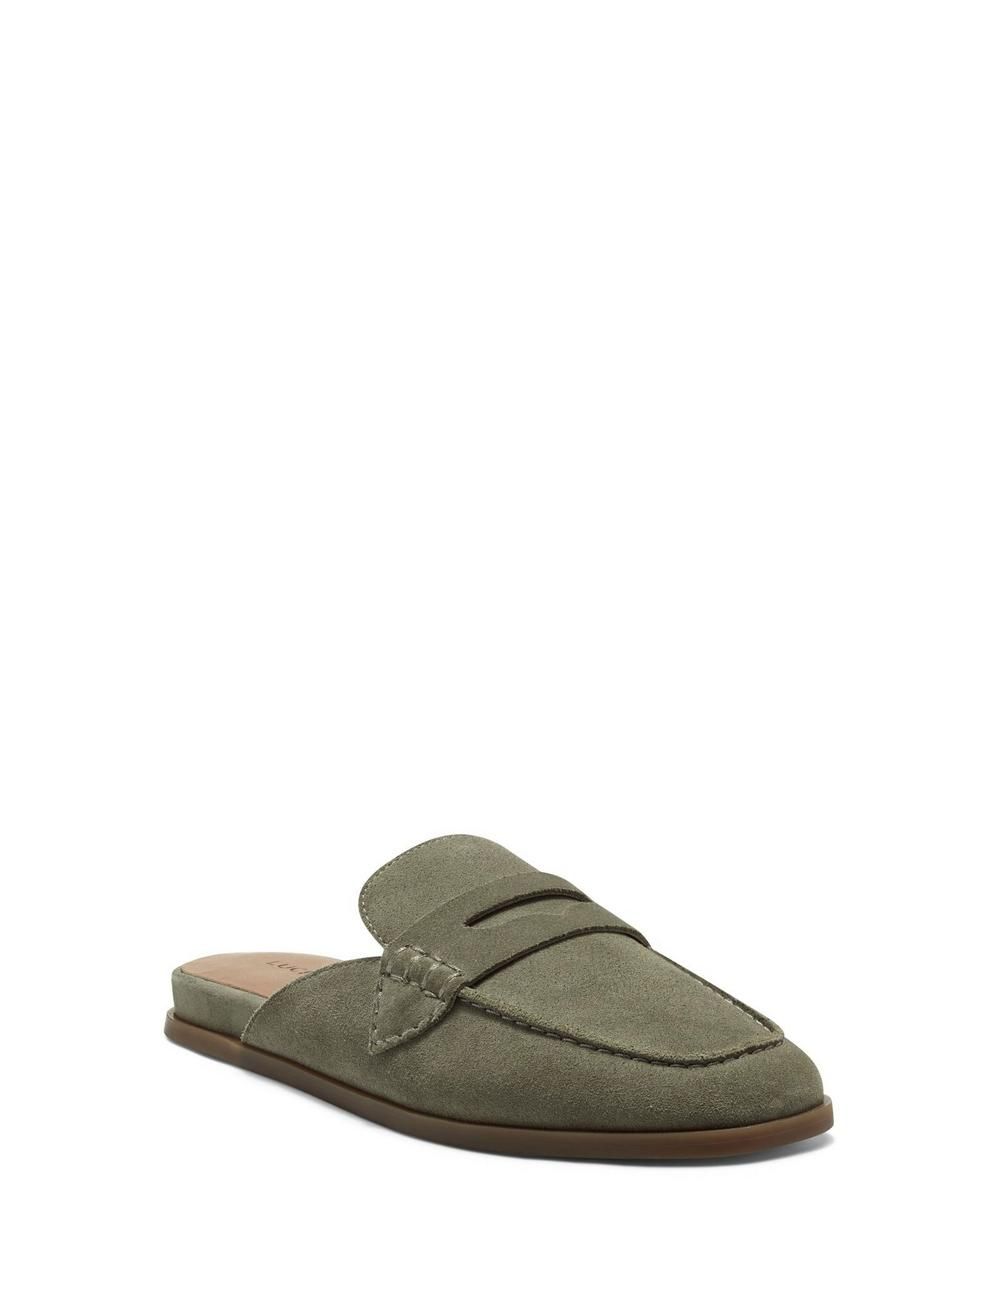 patsie loafer mule | Lucky Brand